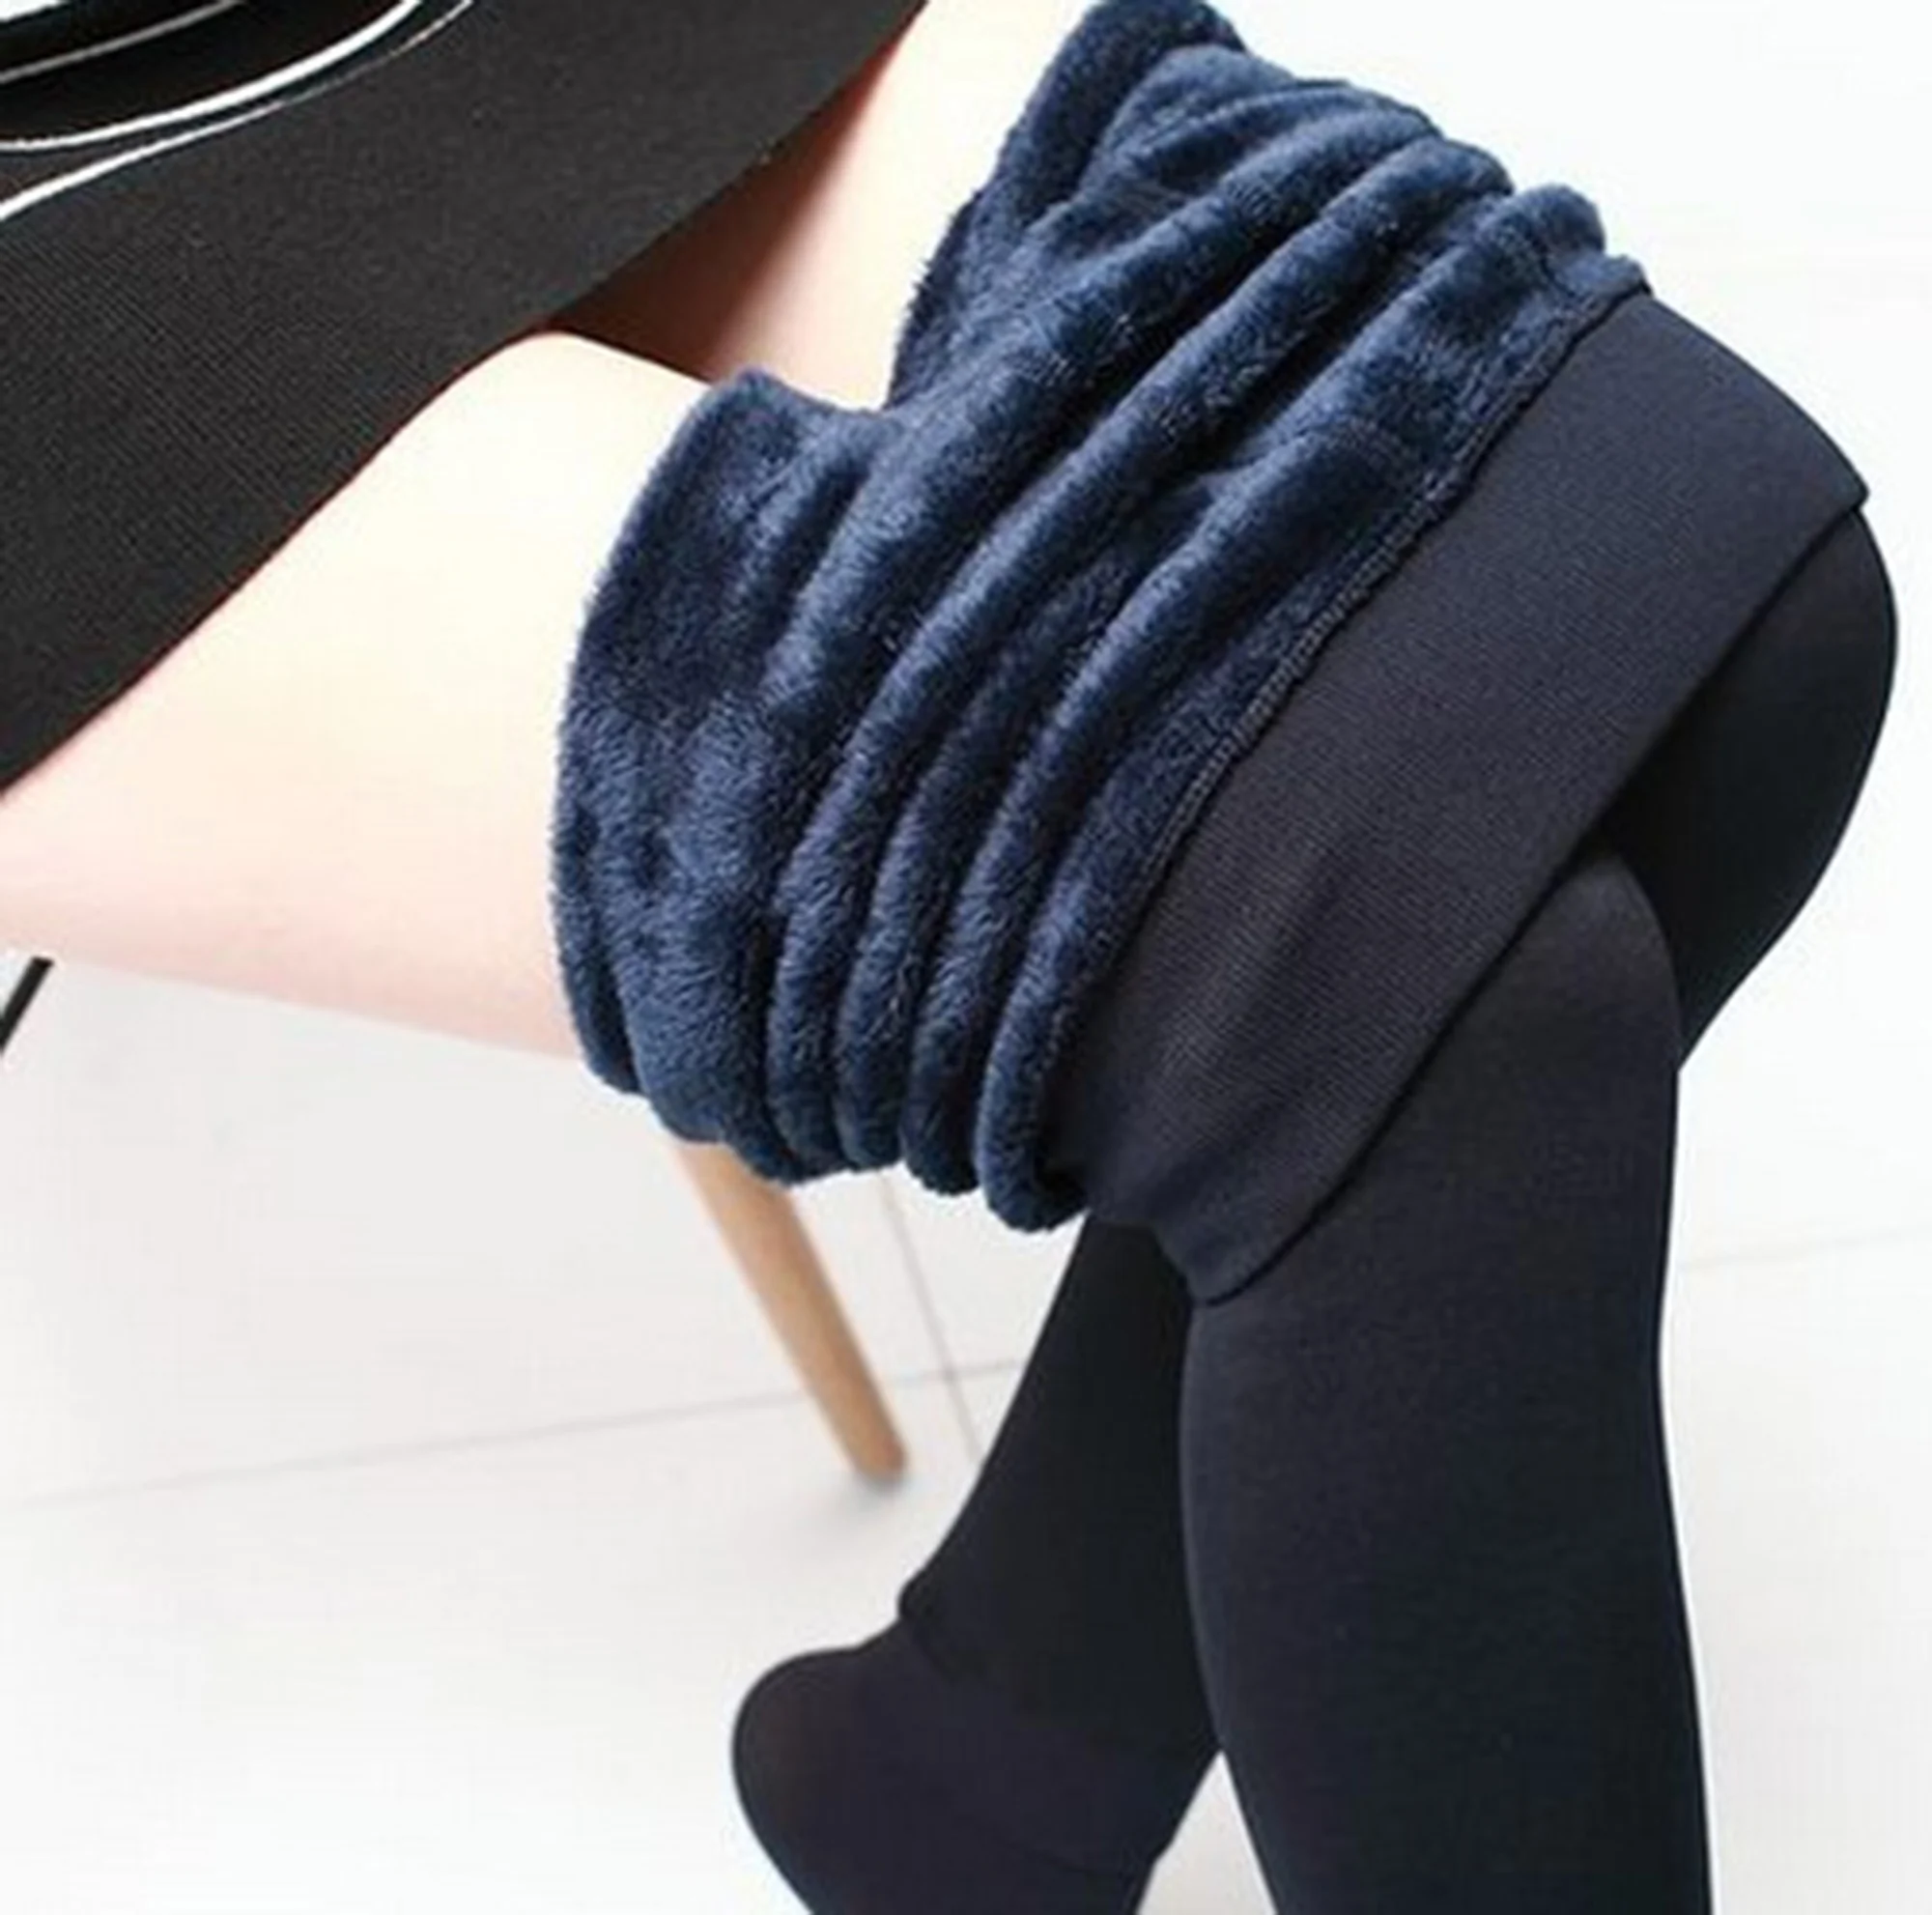 Winter PlusThick Slim Super Elastic Sexy Tights leggings Cashmere Pantyhose Woman Casual Warm Faux Velvet Knitted